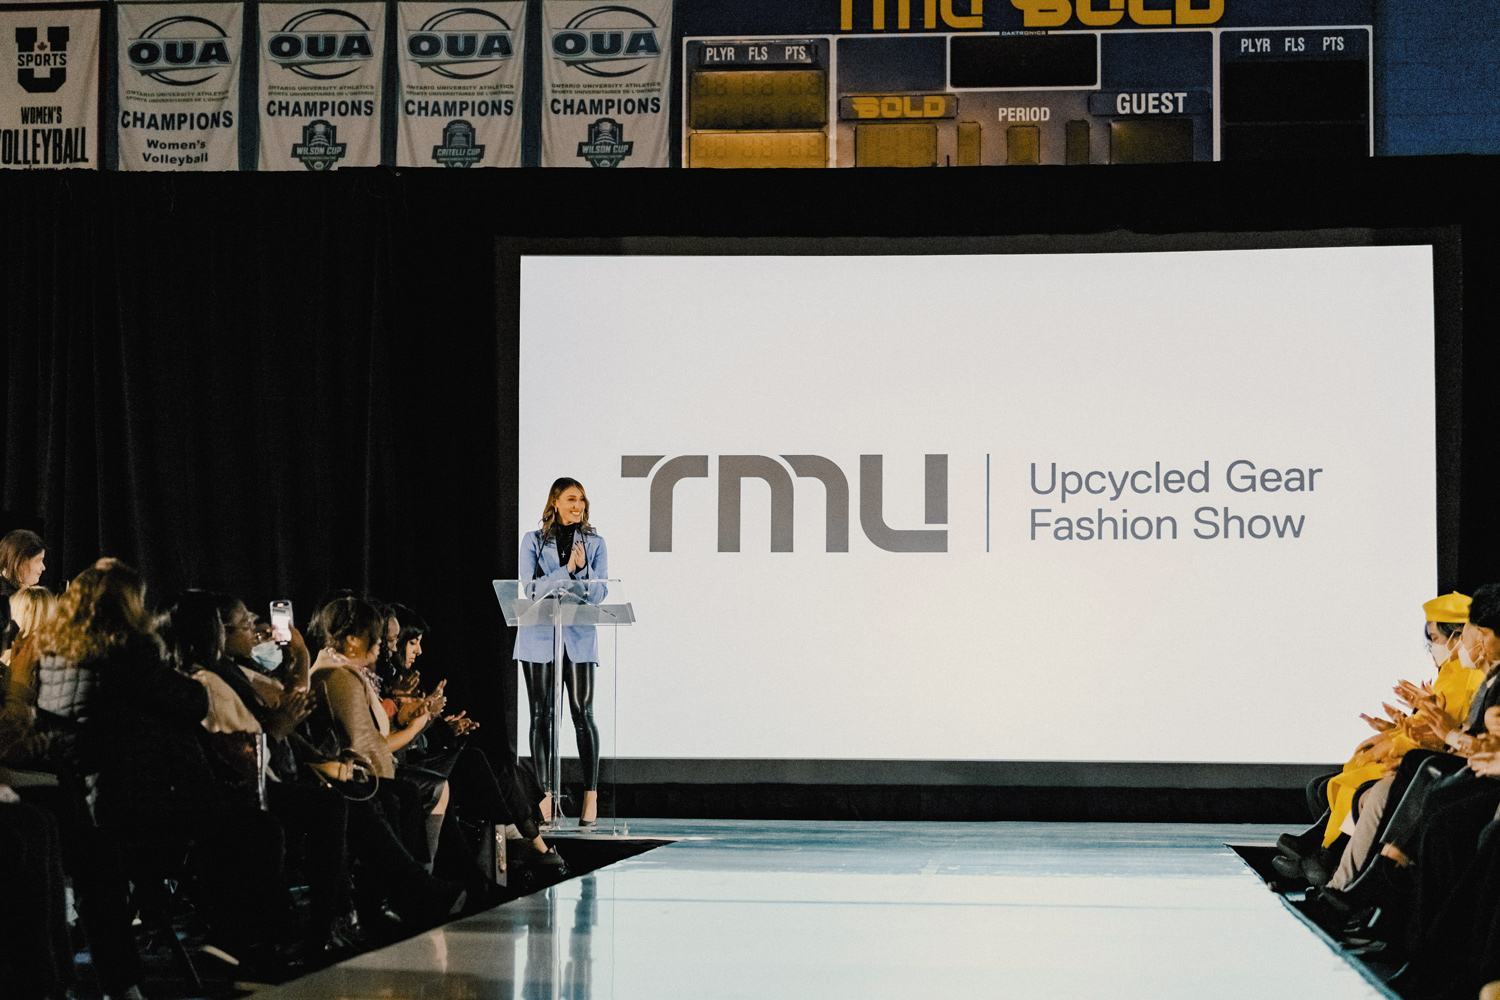 A woman stands at a podium in front of a large screen that says TMU Upcycled Gear Fashion Show